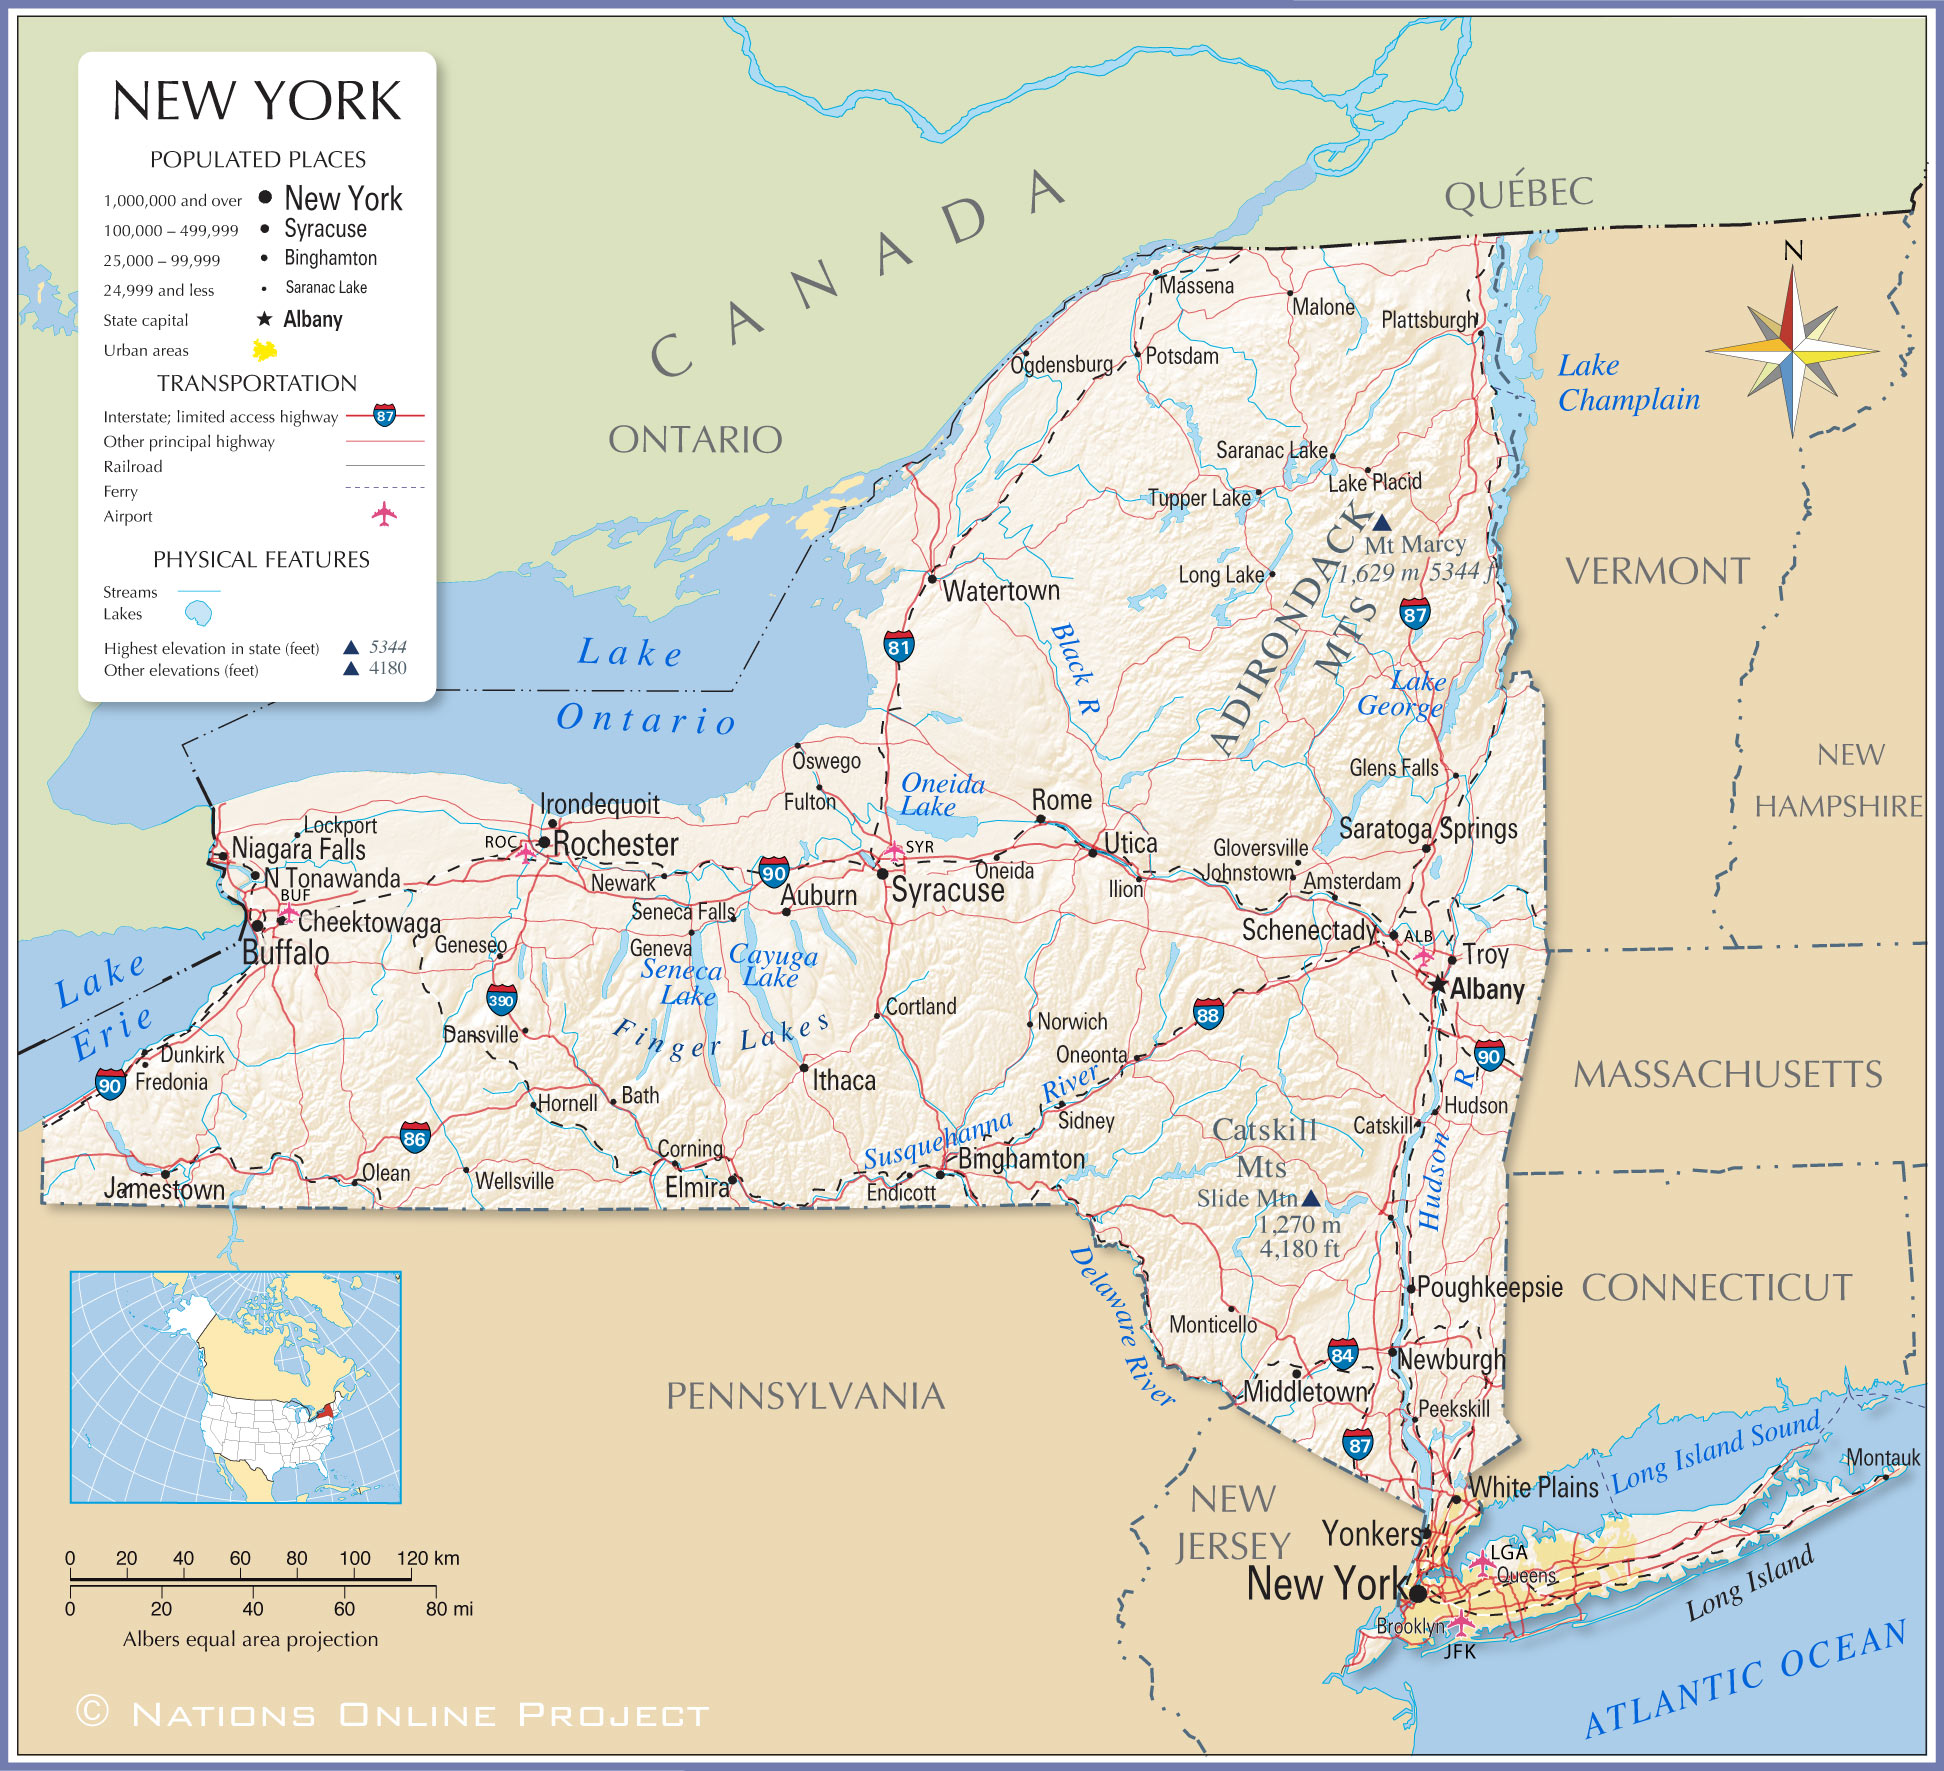 new york state map picture Map Of The State Of New York Usa Nations Online Project new york state map picture